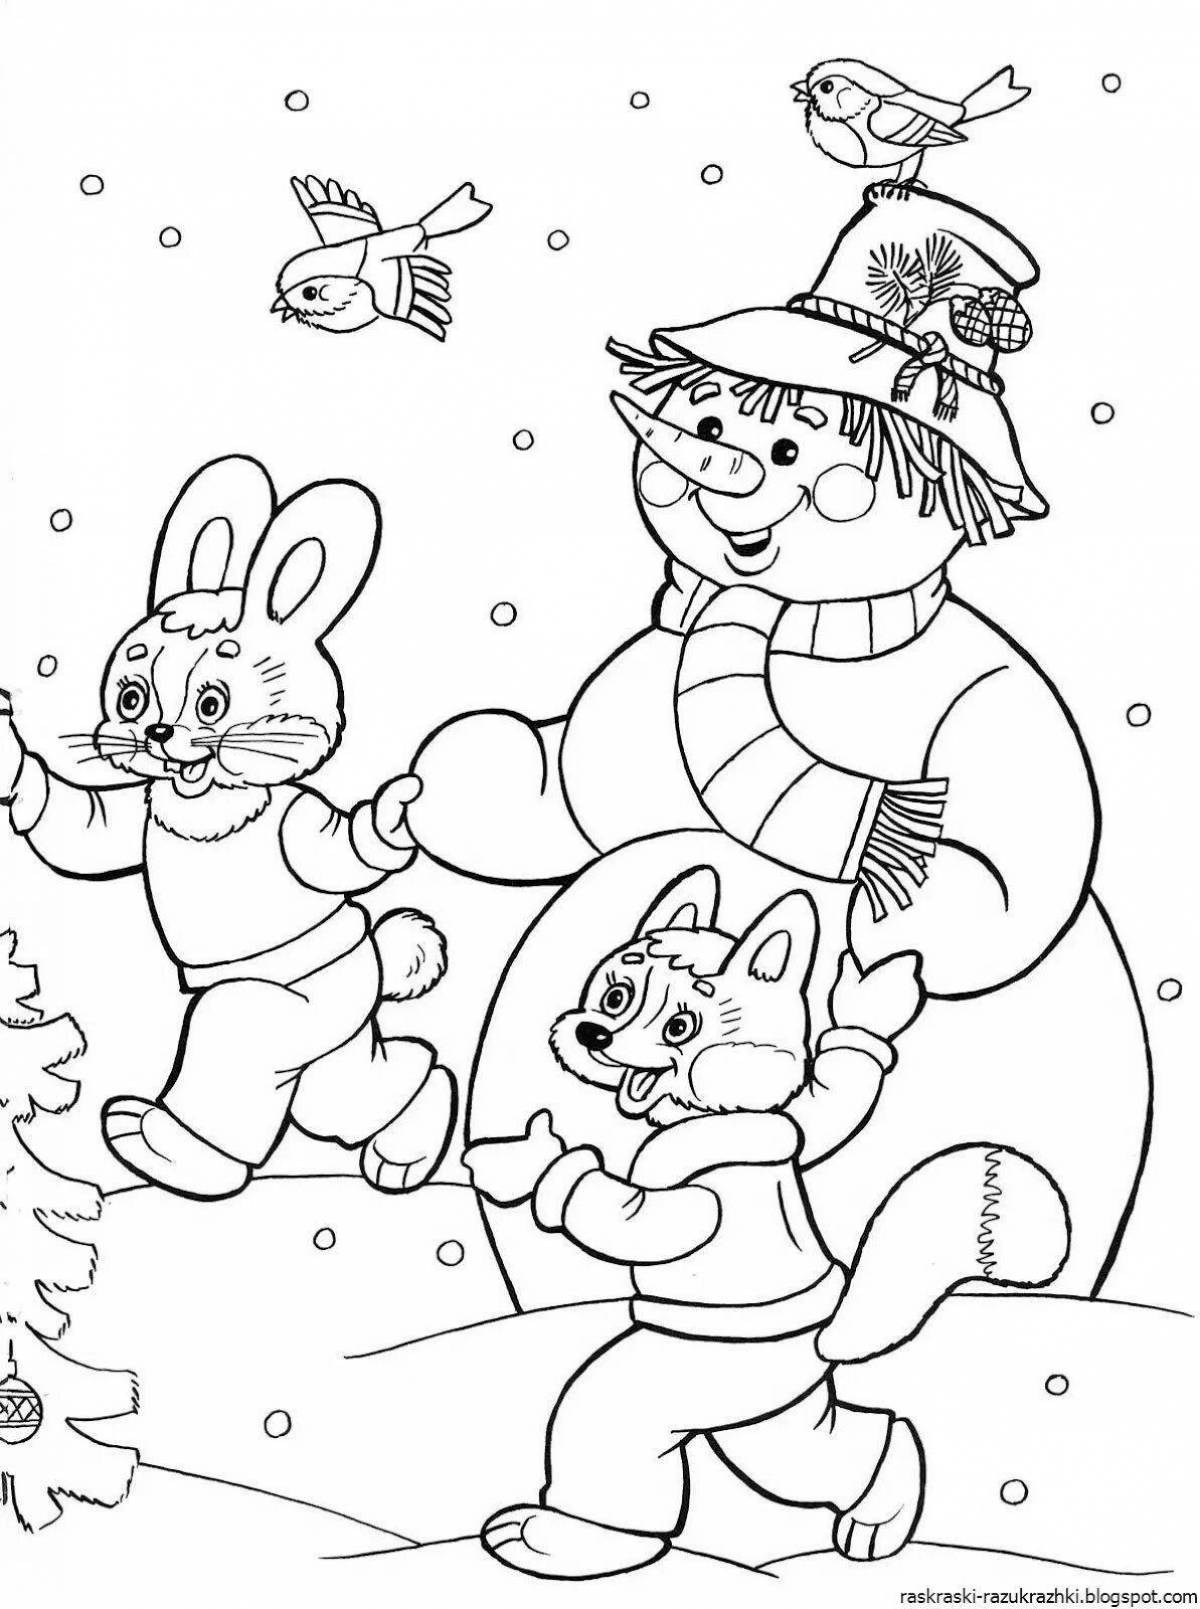 Bright winter coloring book for children 6 years old